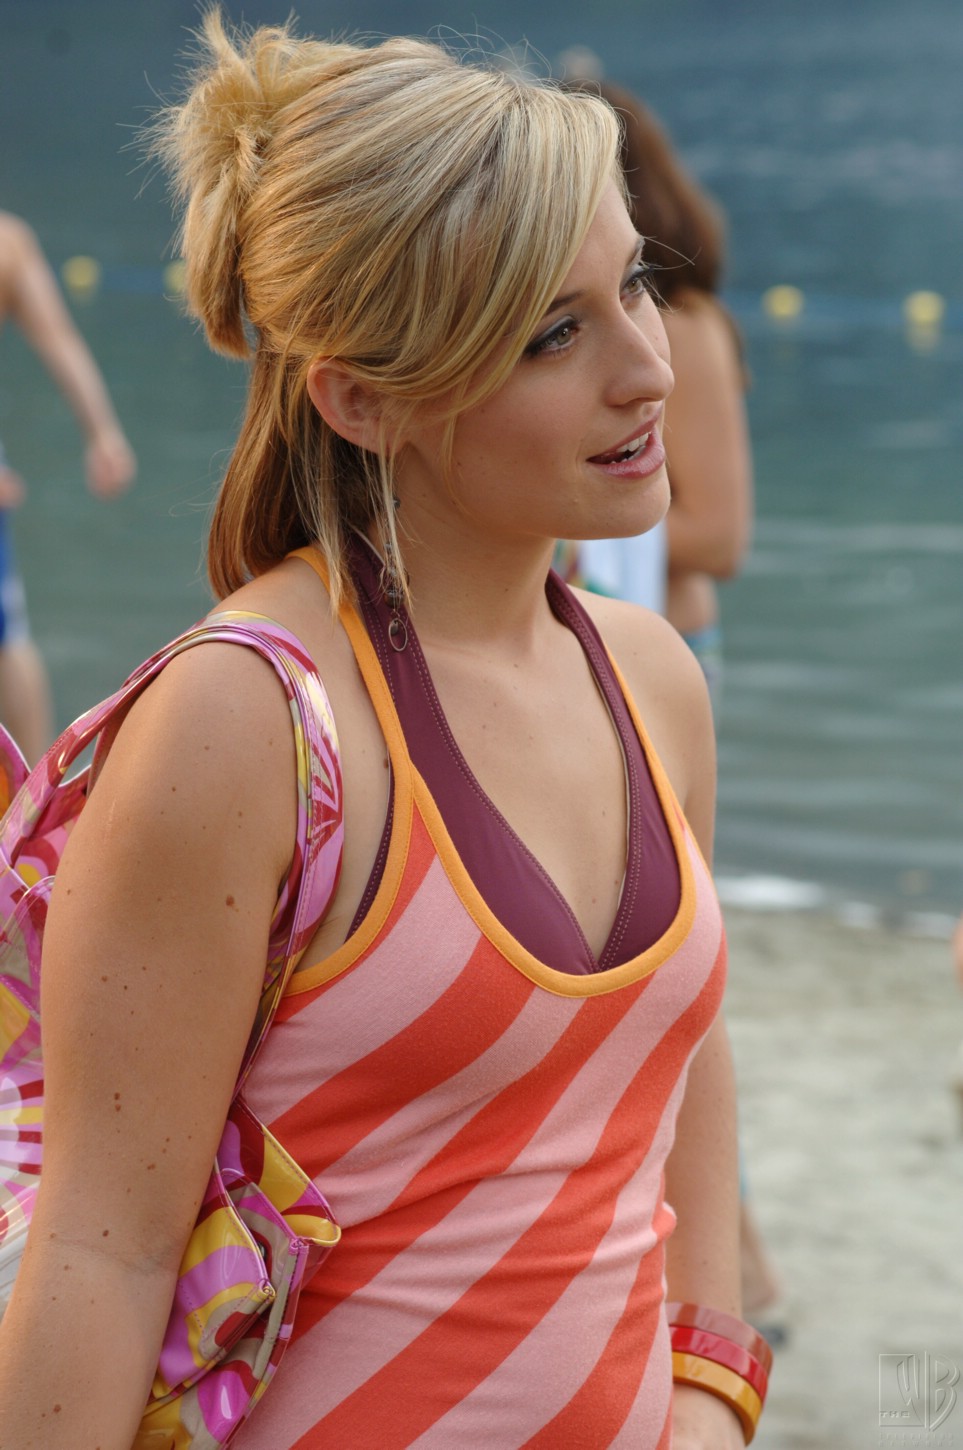 Allison Mack Hot Bikini Topless Pictures Feet Images Of Wilfred Actress.